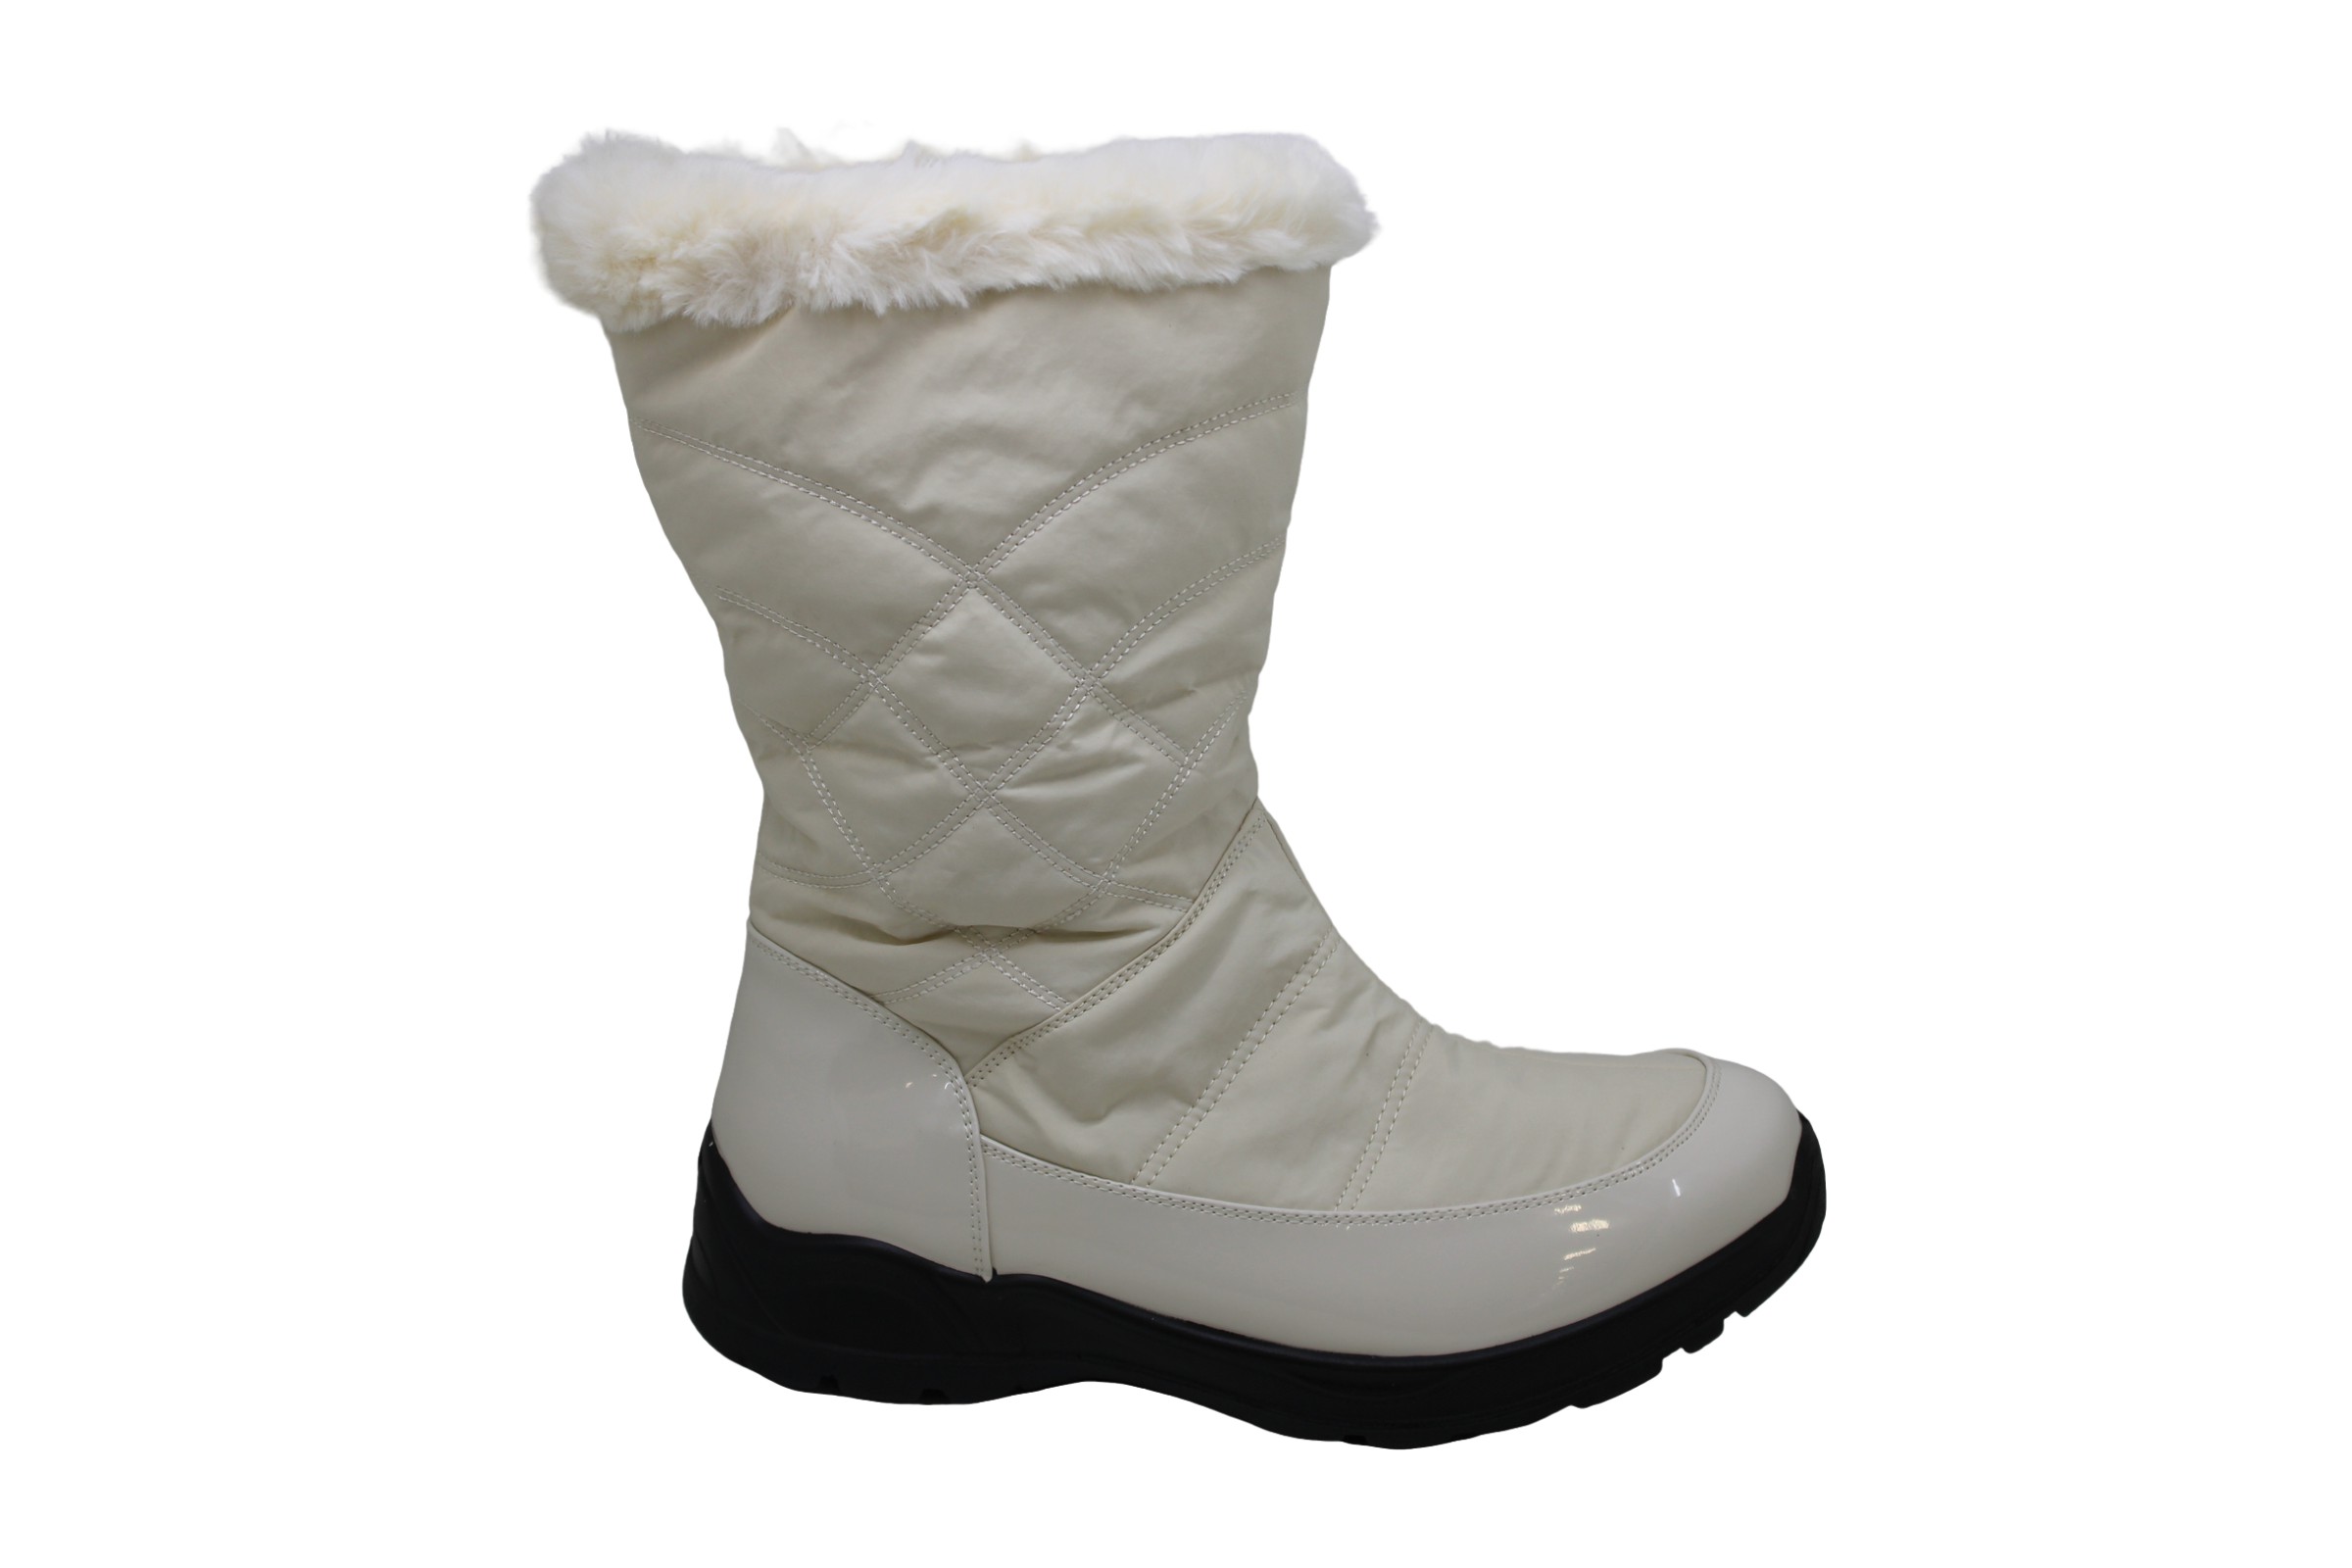 Easy Street Womens Boots in White Color, Size 6 KAQ | eBay